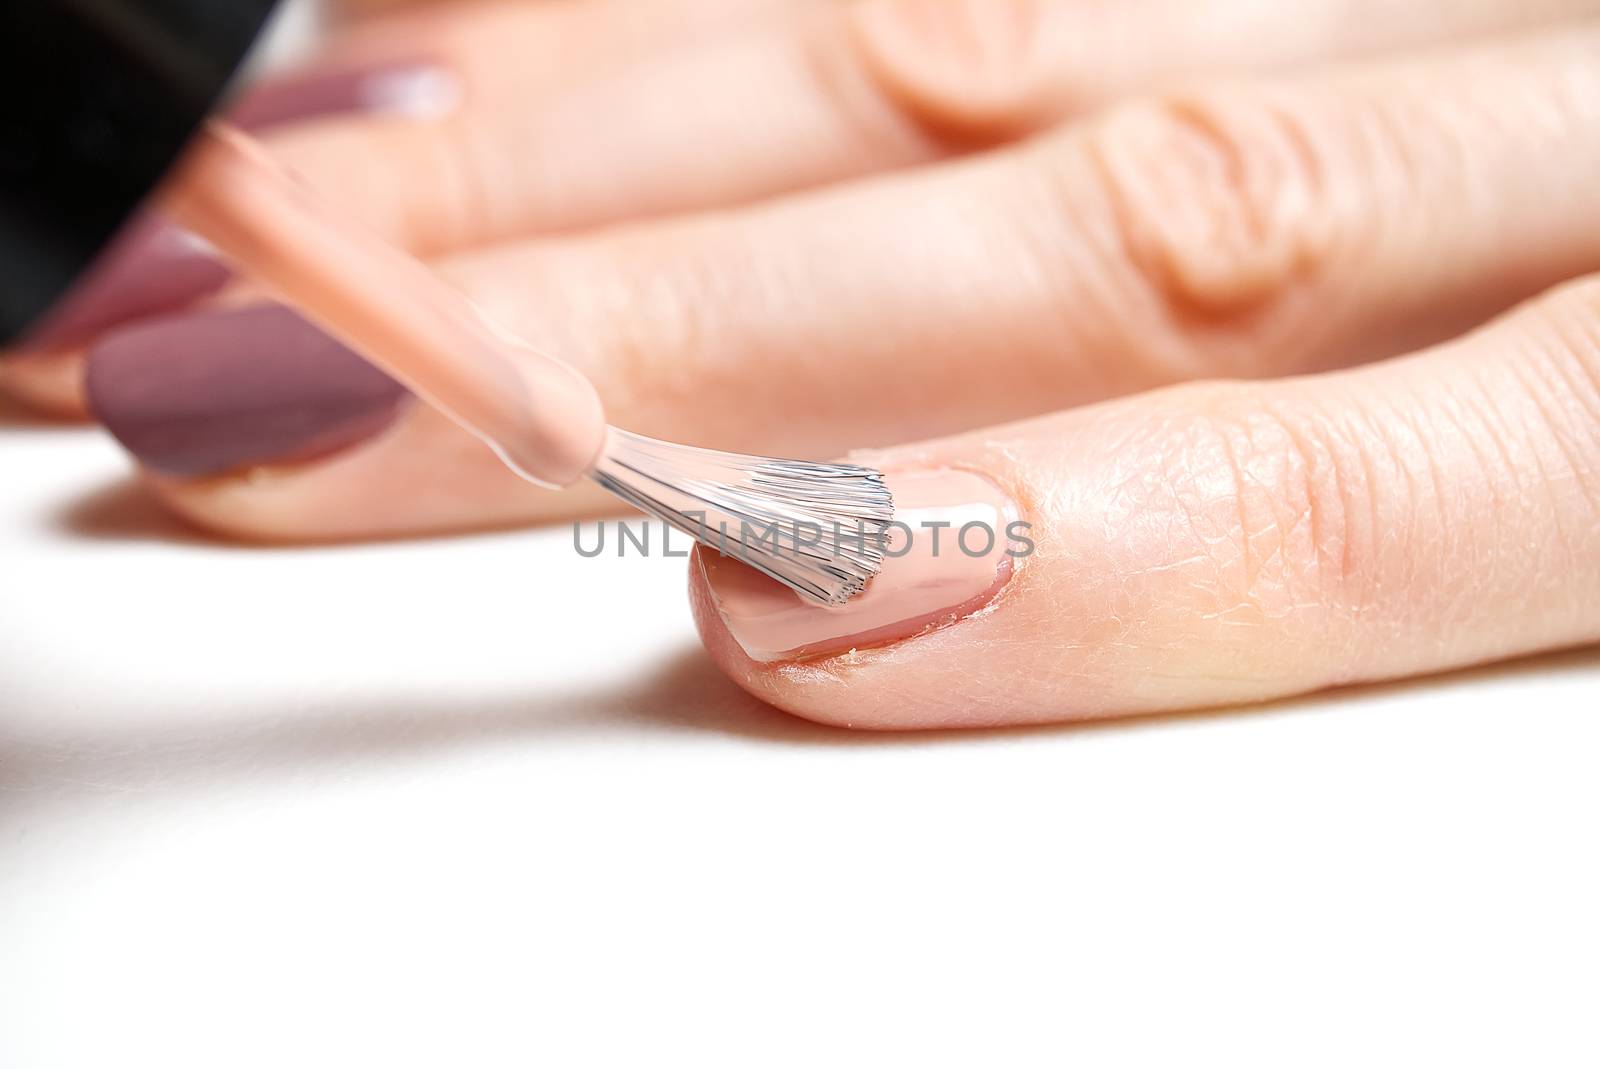 Woman applying nail polish. Beautiful nails. Woman applying polish on nails at home. Pastel nail polish on fingernail. Beauty treatment and hand care concept. manicure procedures yourself at home.